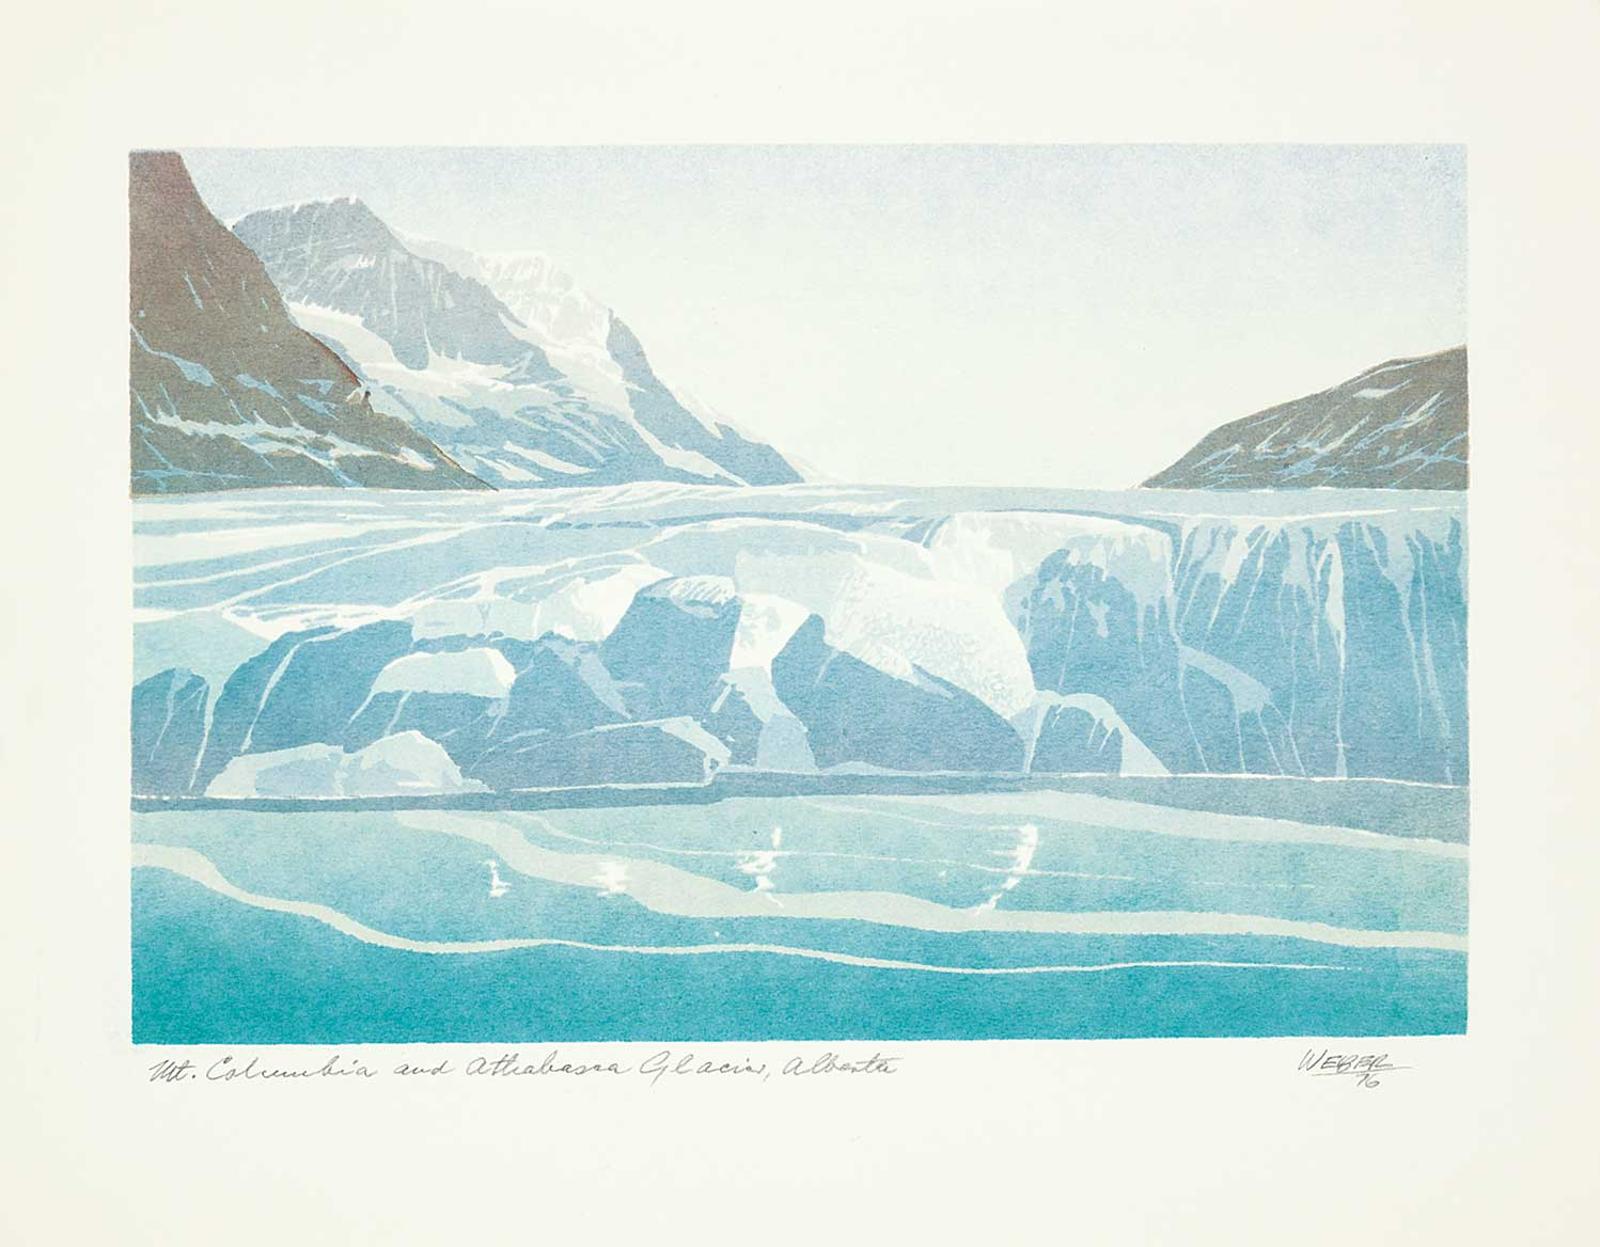 George Weber (1907-2002) - Mt. Columbia and Athabasca Glacier